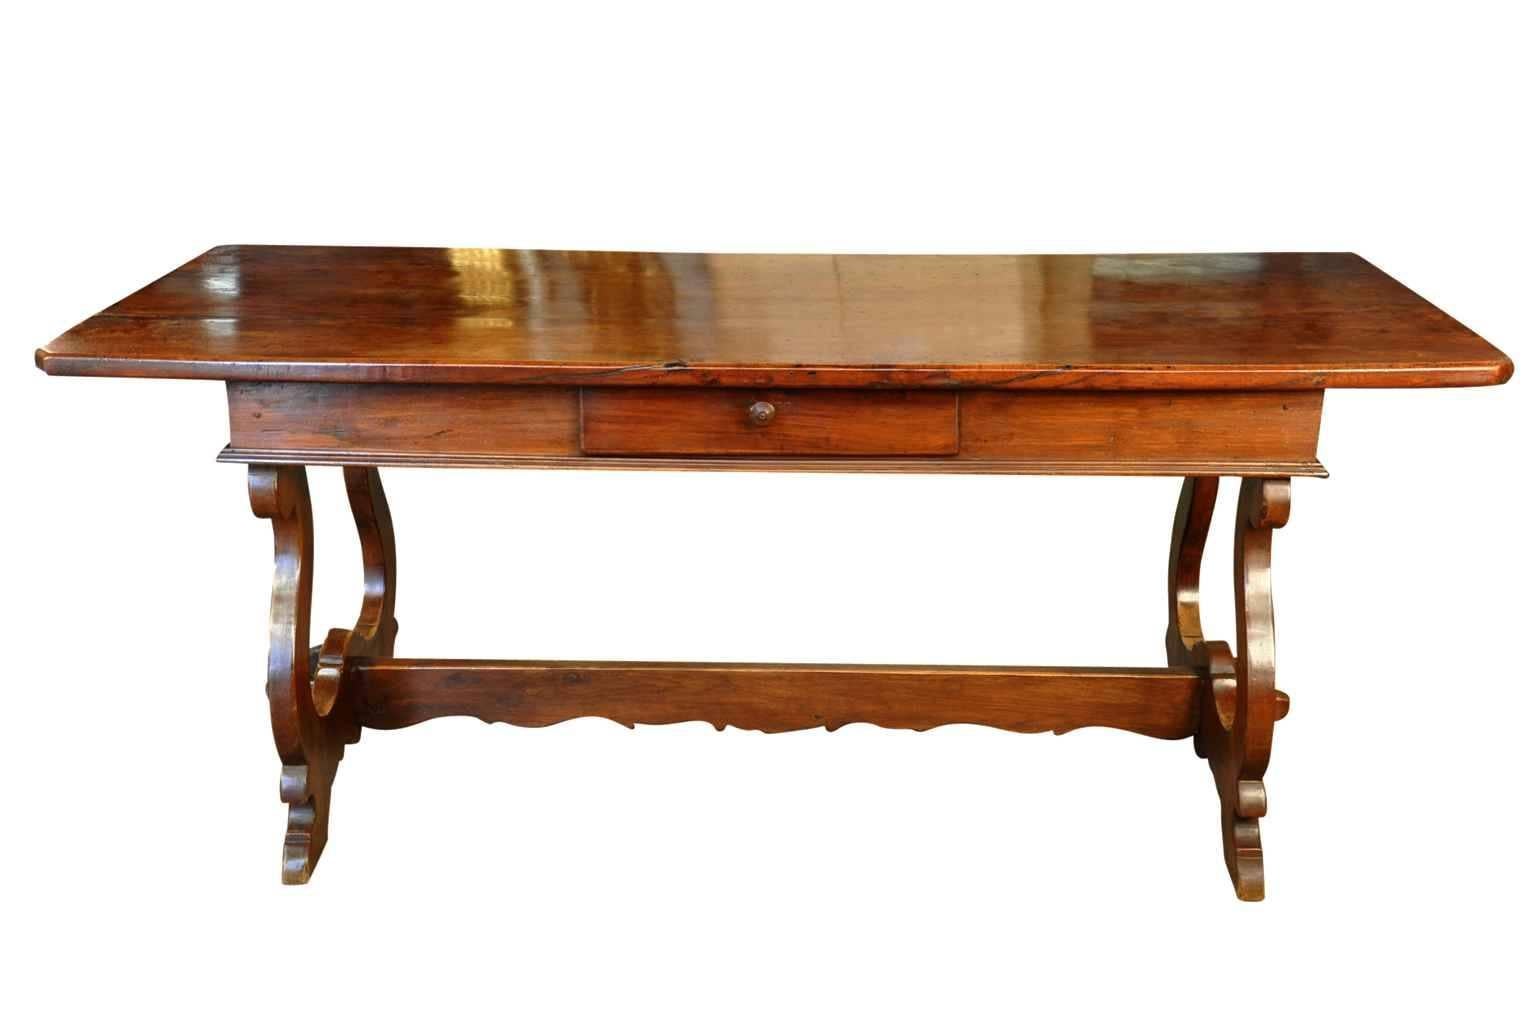 A very elegant mid-19th century desk - writing table from Italy.  Beautifully constructed with classical lyre legs and trestle.  One drawer.  The patina is rich and luminous.  Not only does this piece serve wonderfully as a desk, but as a sofa table